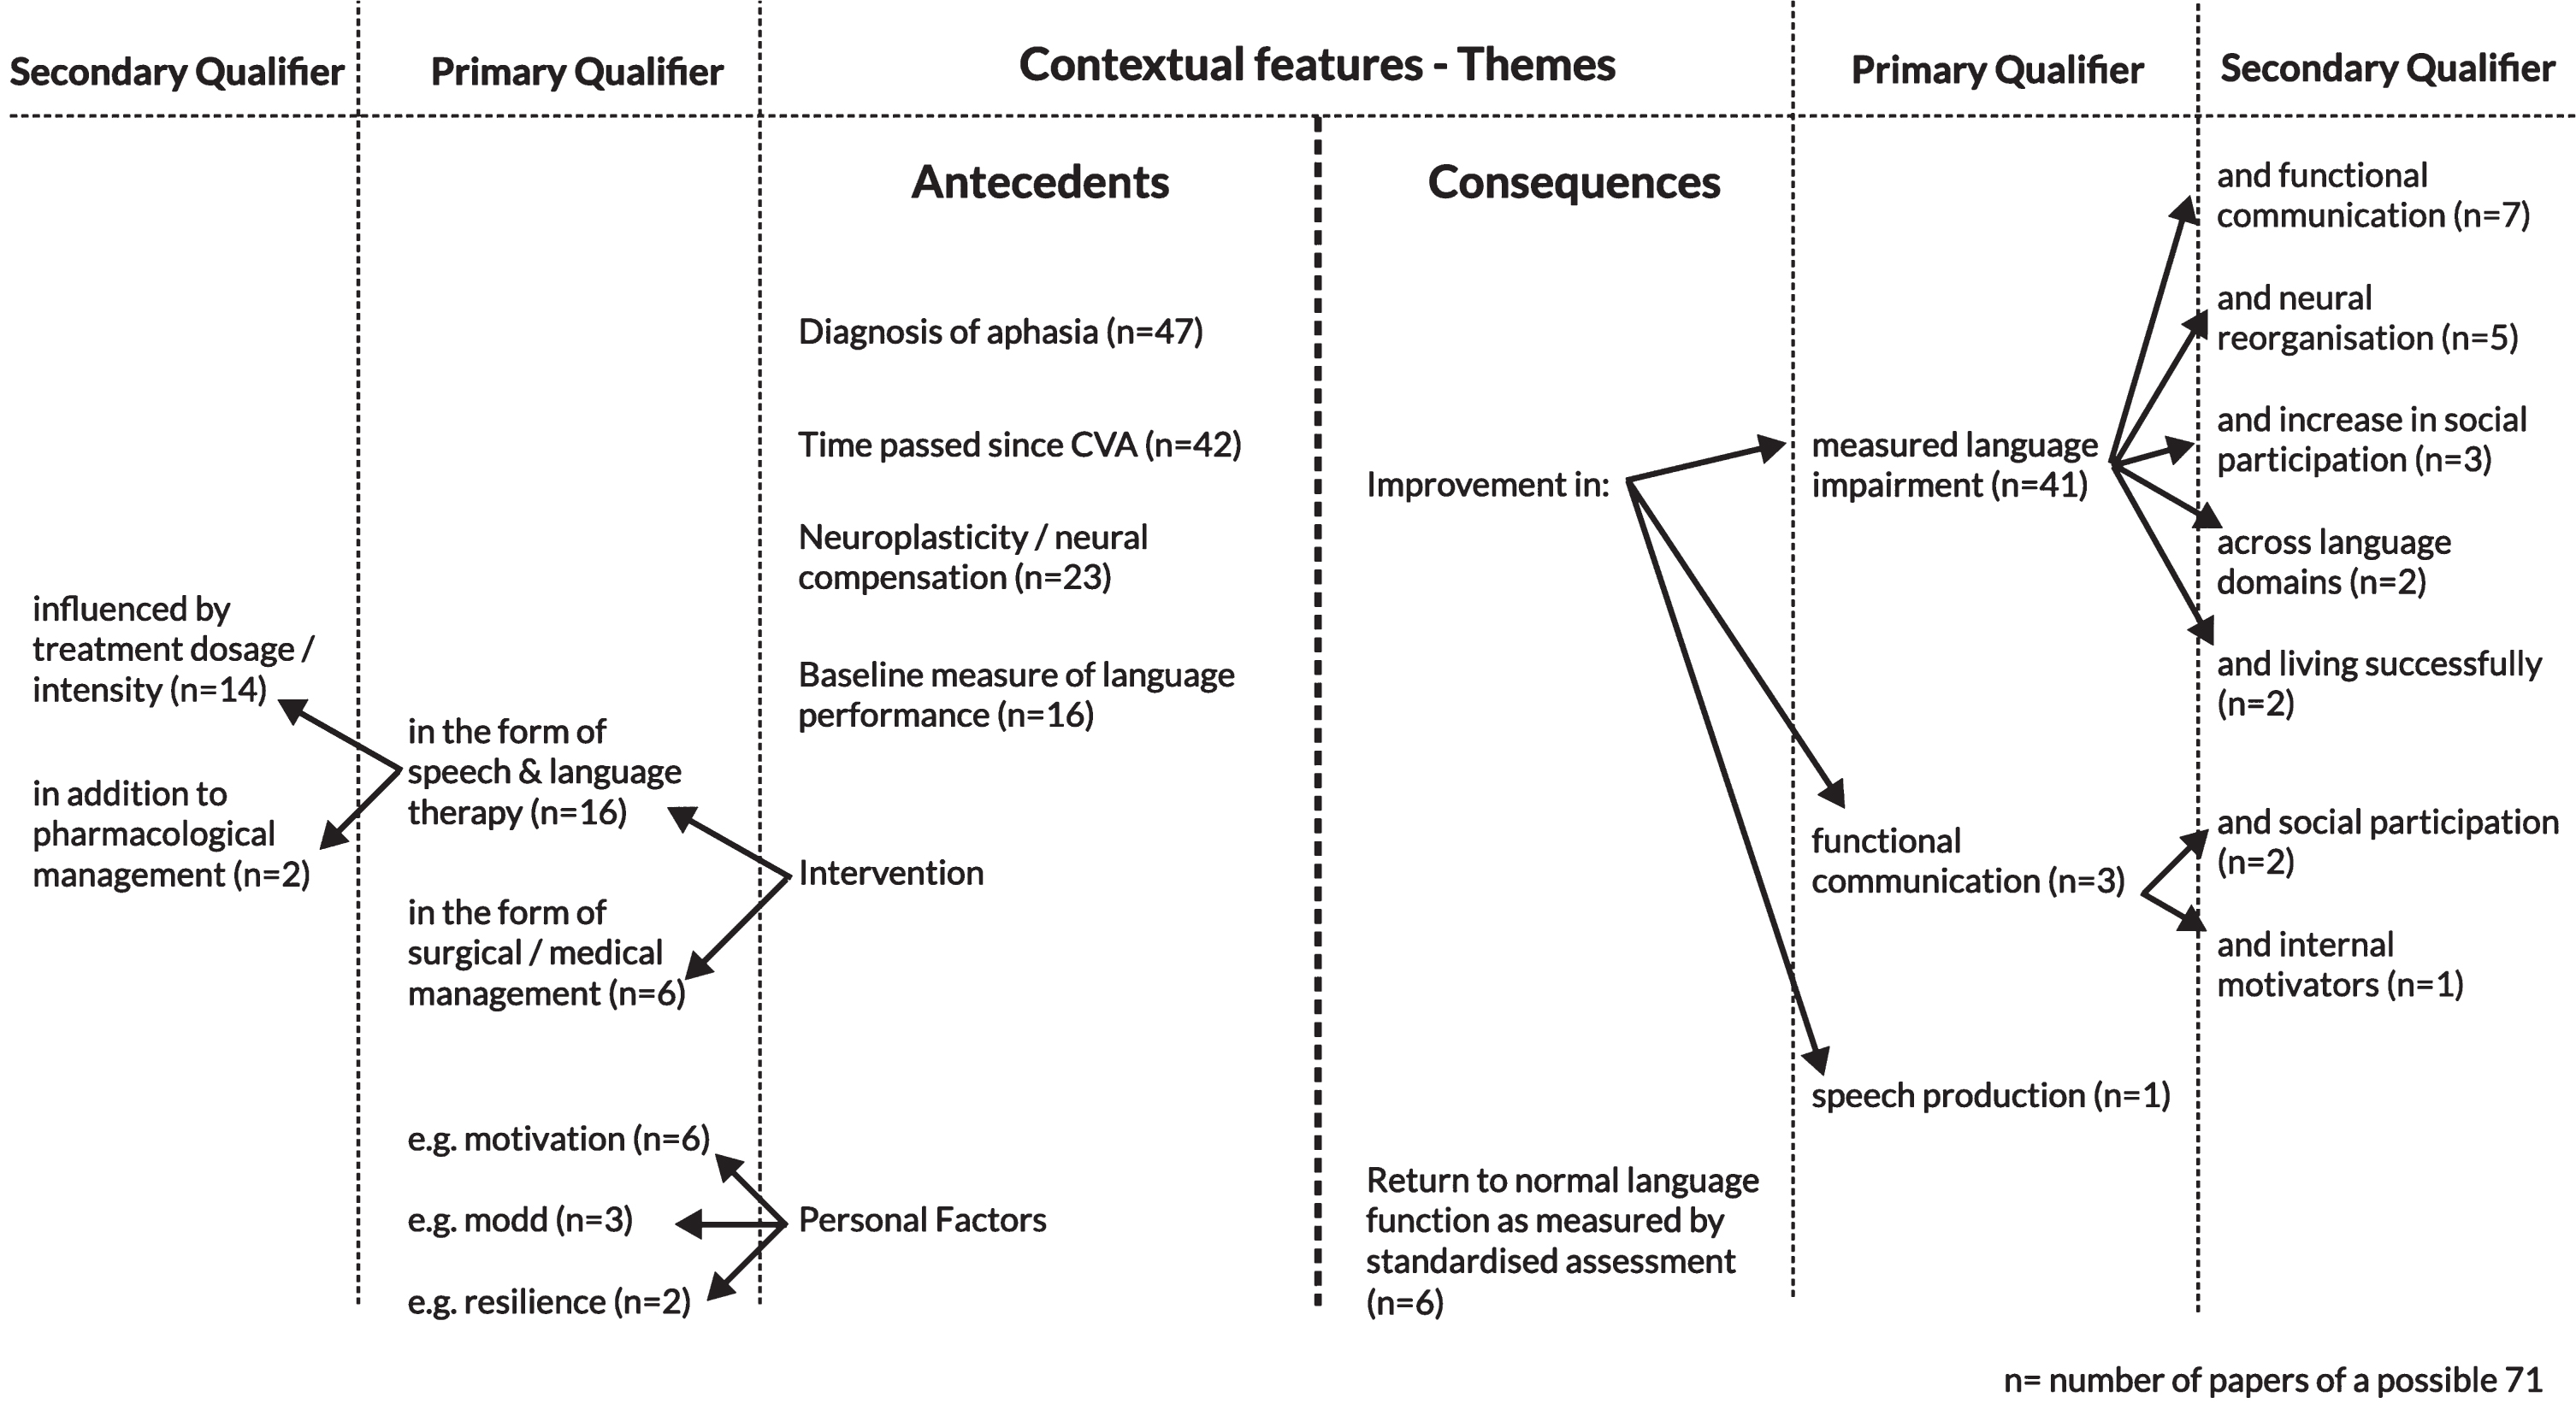 Contextual features of the concept of recovery: Themes and Qualifiers.